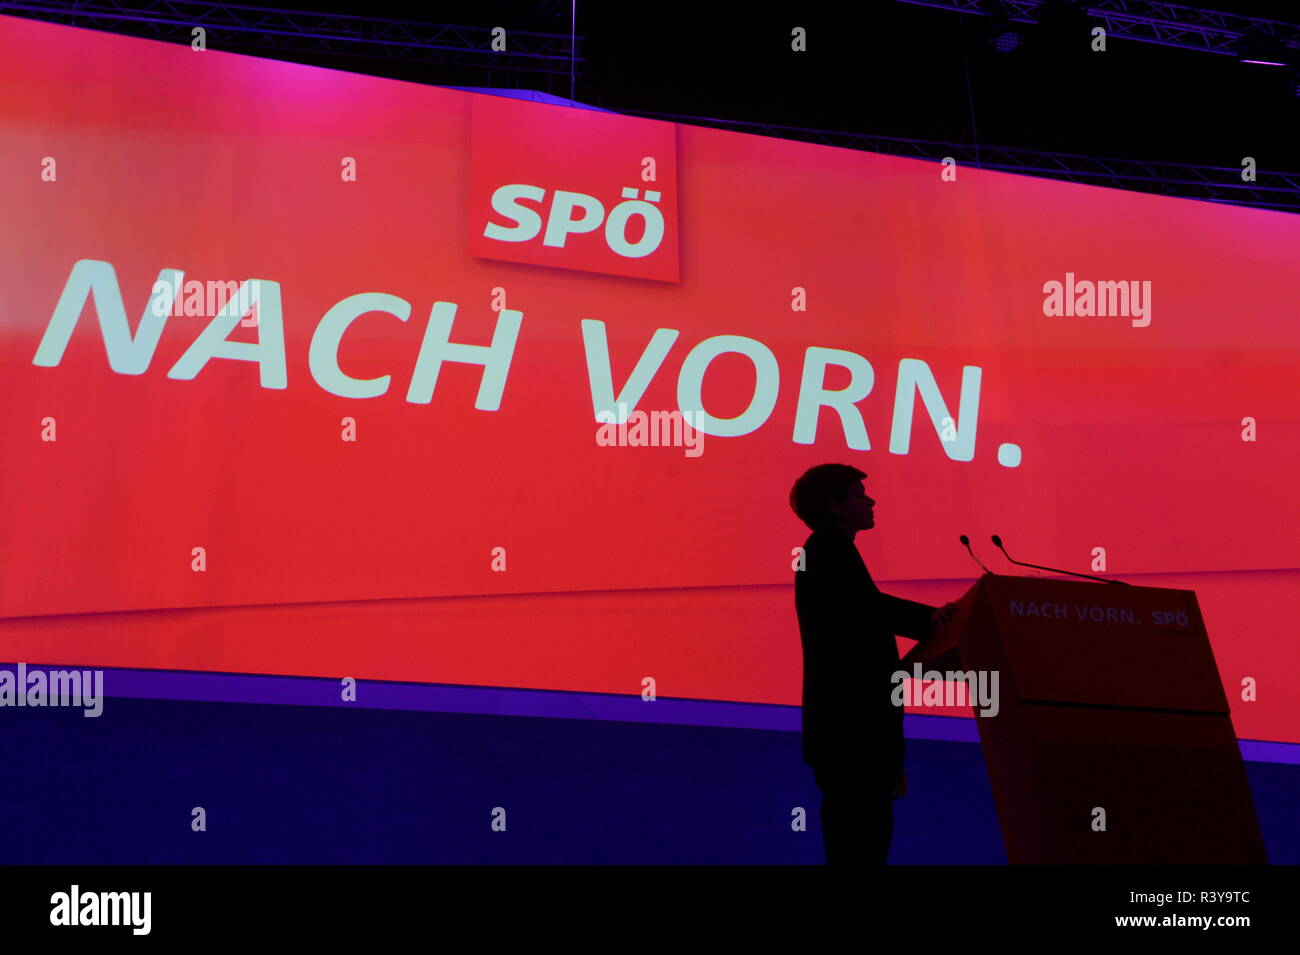 Wels, Upper Austria, Austria. November 24, 2018. On November 24 and 25, 2018, the SPÖ (Social Democratic Party of Austria) holds its 44th Ordinary Federal Party Congress in the Messehalle Wels.  Picture shows Pamela Rendi Wagner.  Credit: Franz Perc / Alamy Live News Stock Photo